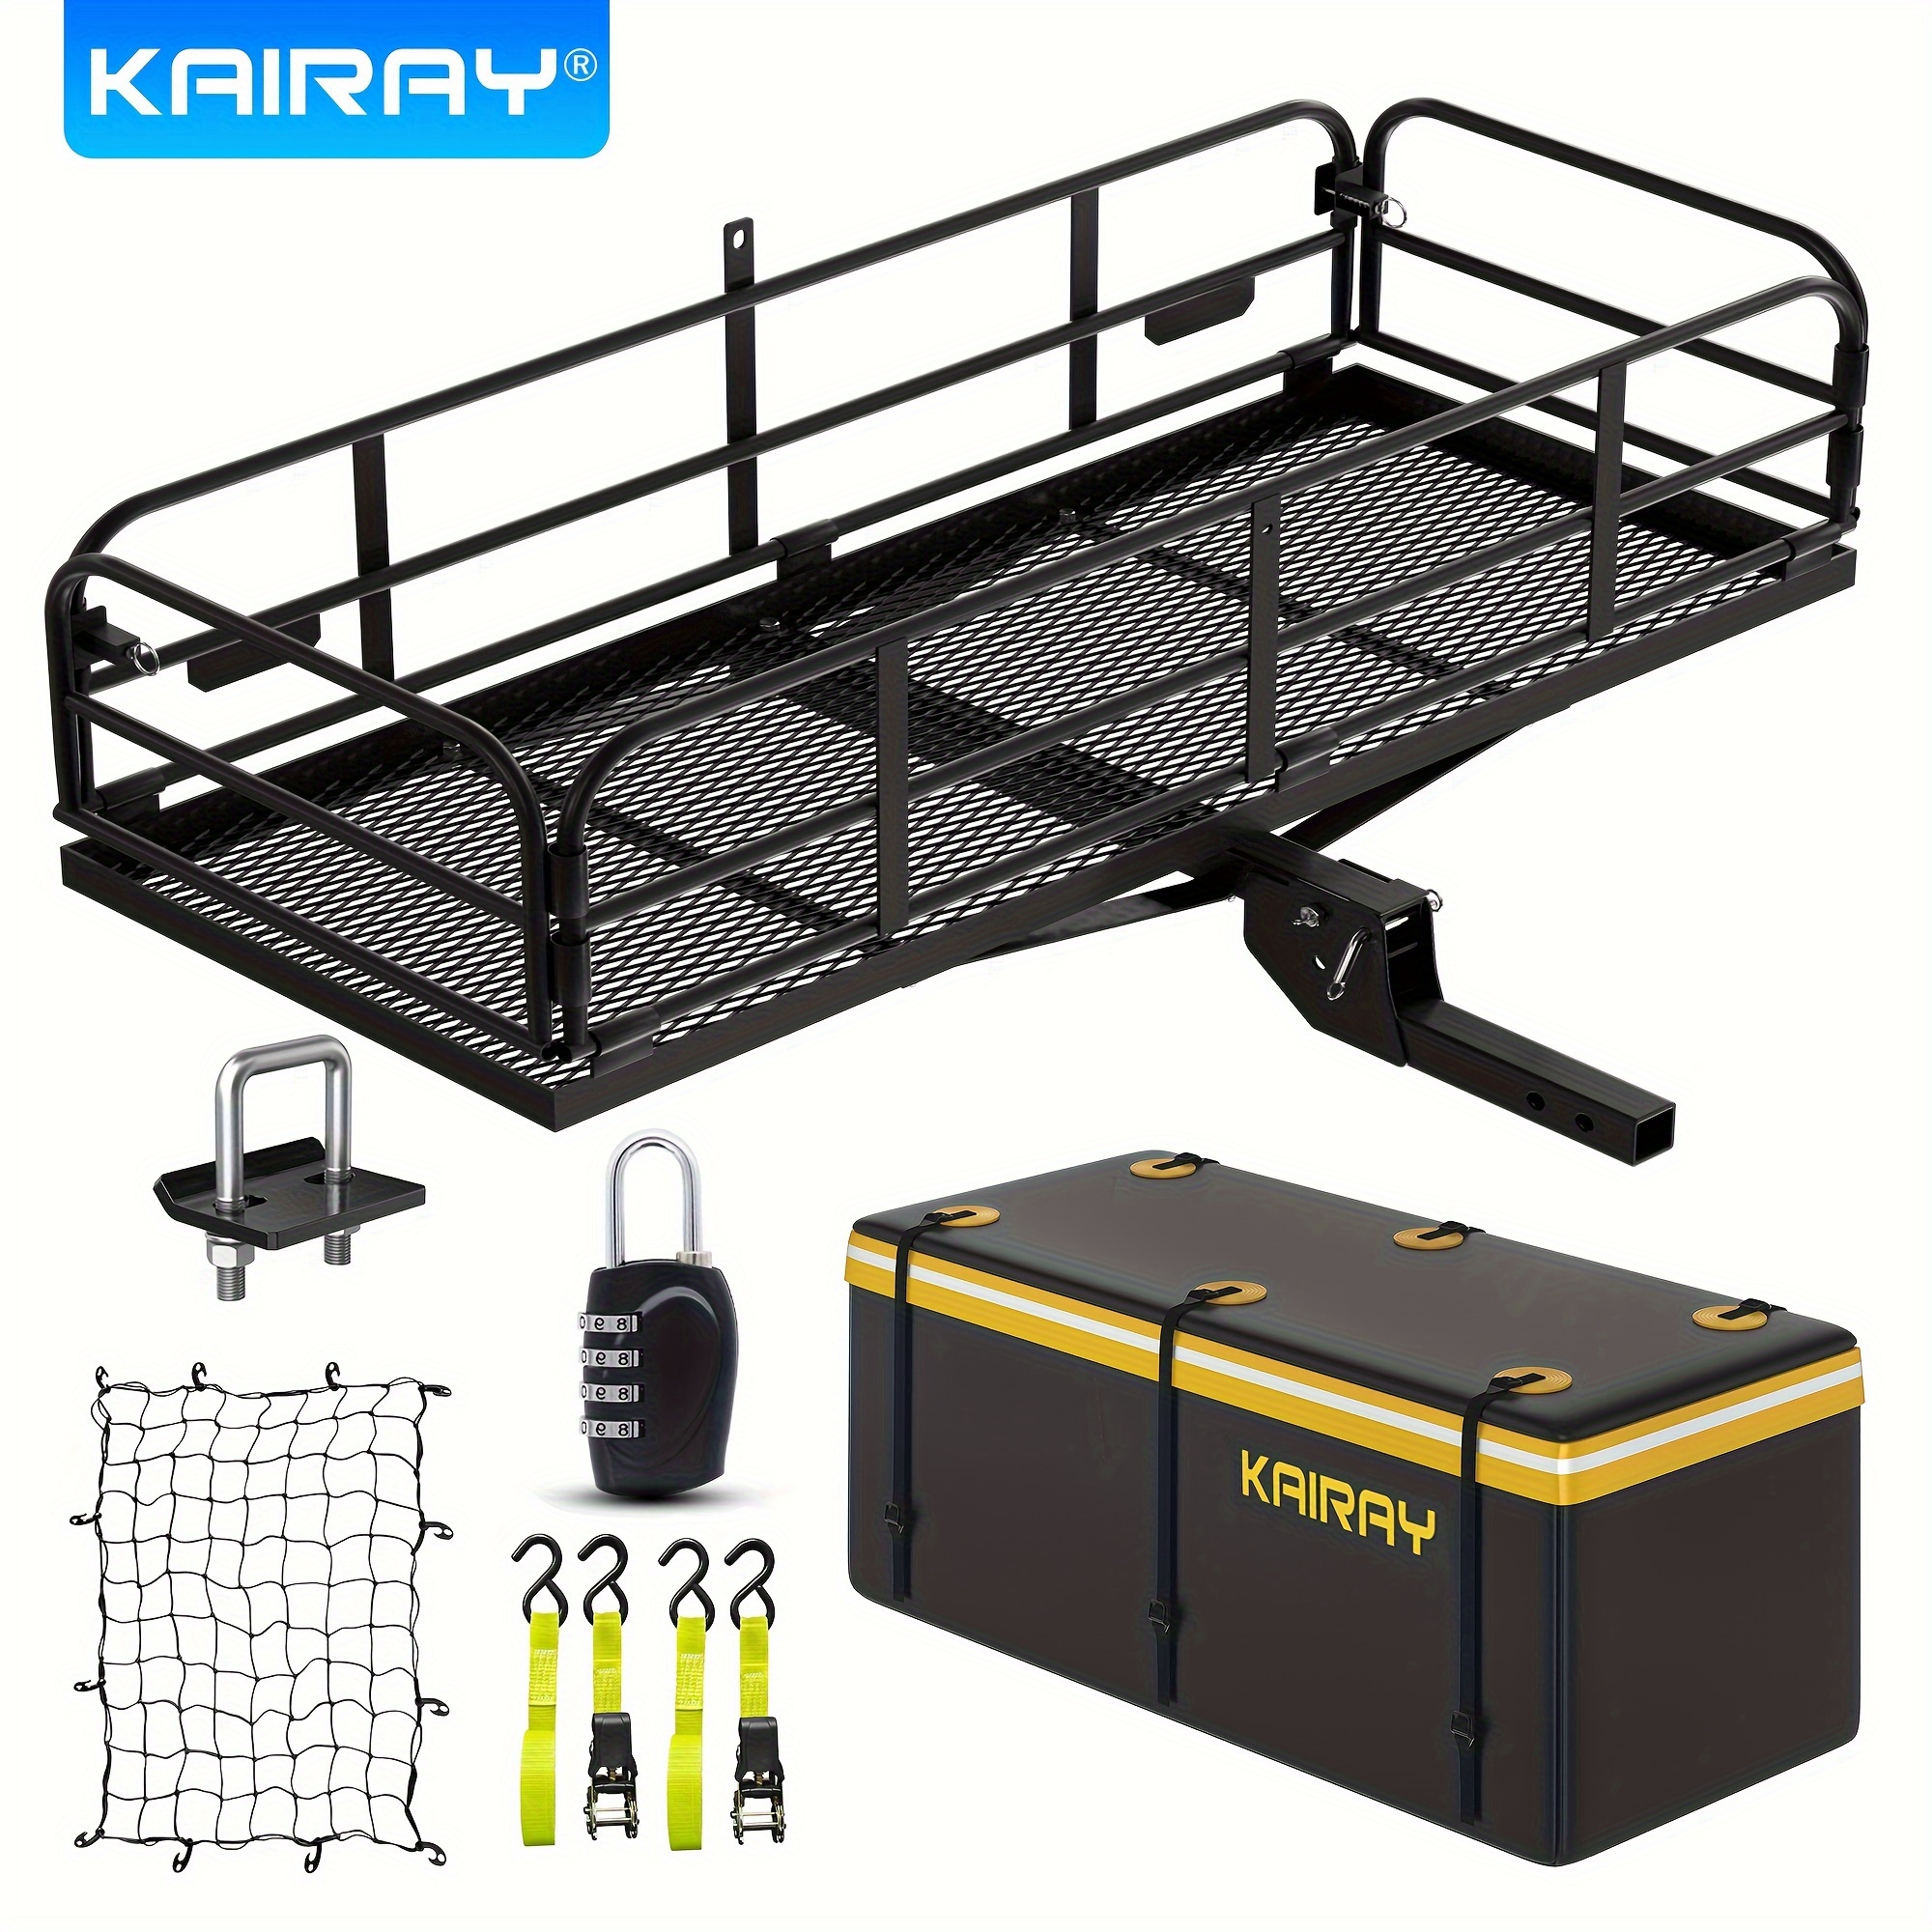 

500 Lbs Heavy Duty Hitch Mount Cargo Carrier 60" X 24" X 14.4"/ 152.4cm X 61cm X 36.5cm Folding Cargo Rack Rear Luggage Basket Fits Any Standard 2" Hitch Receiver For Car Suv Camping Traveling